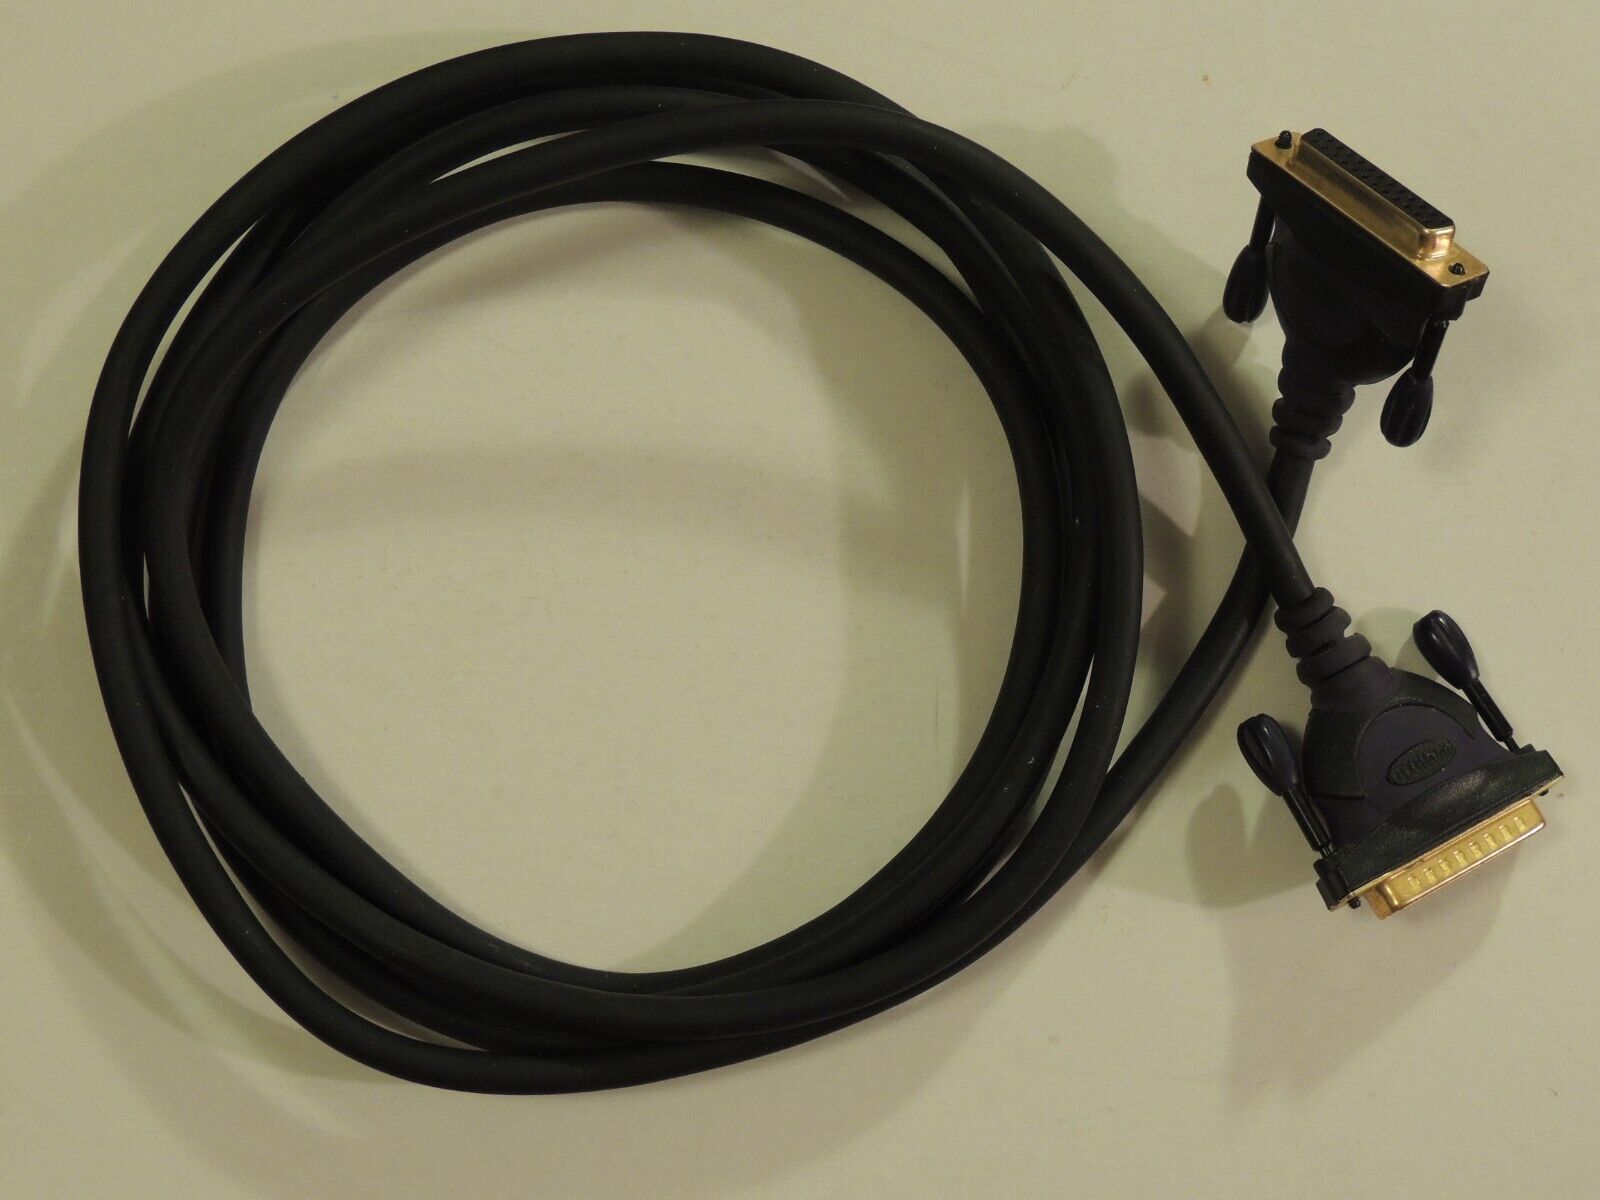 Belkin F2A048-10GLD Parallel Extension Cable 10 feet long